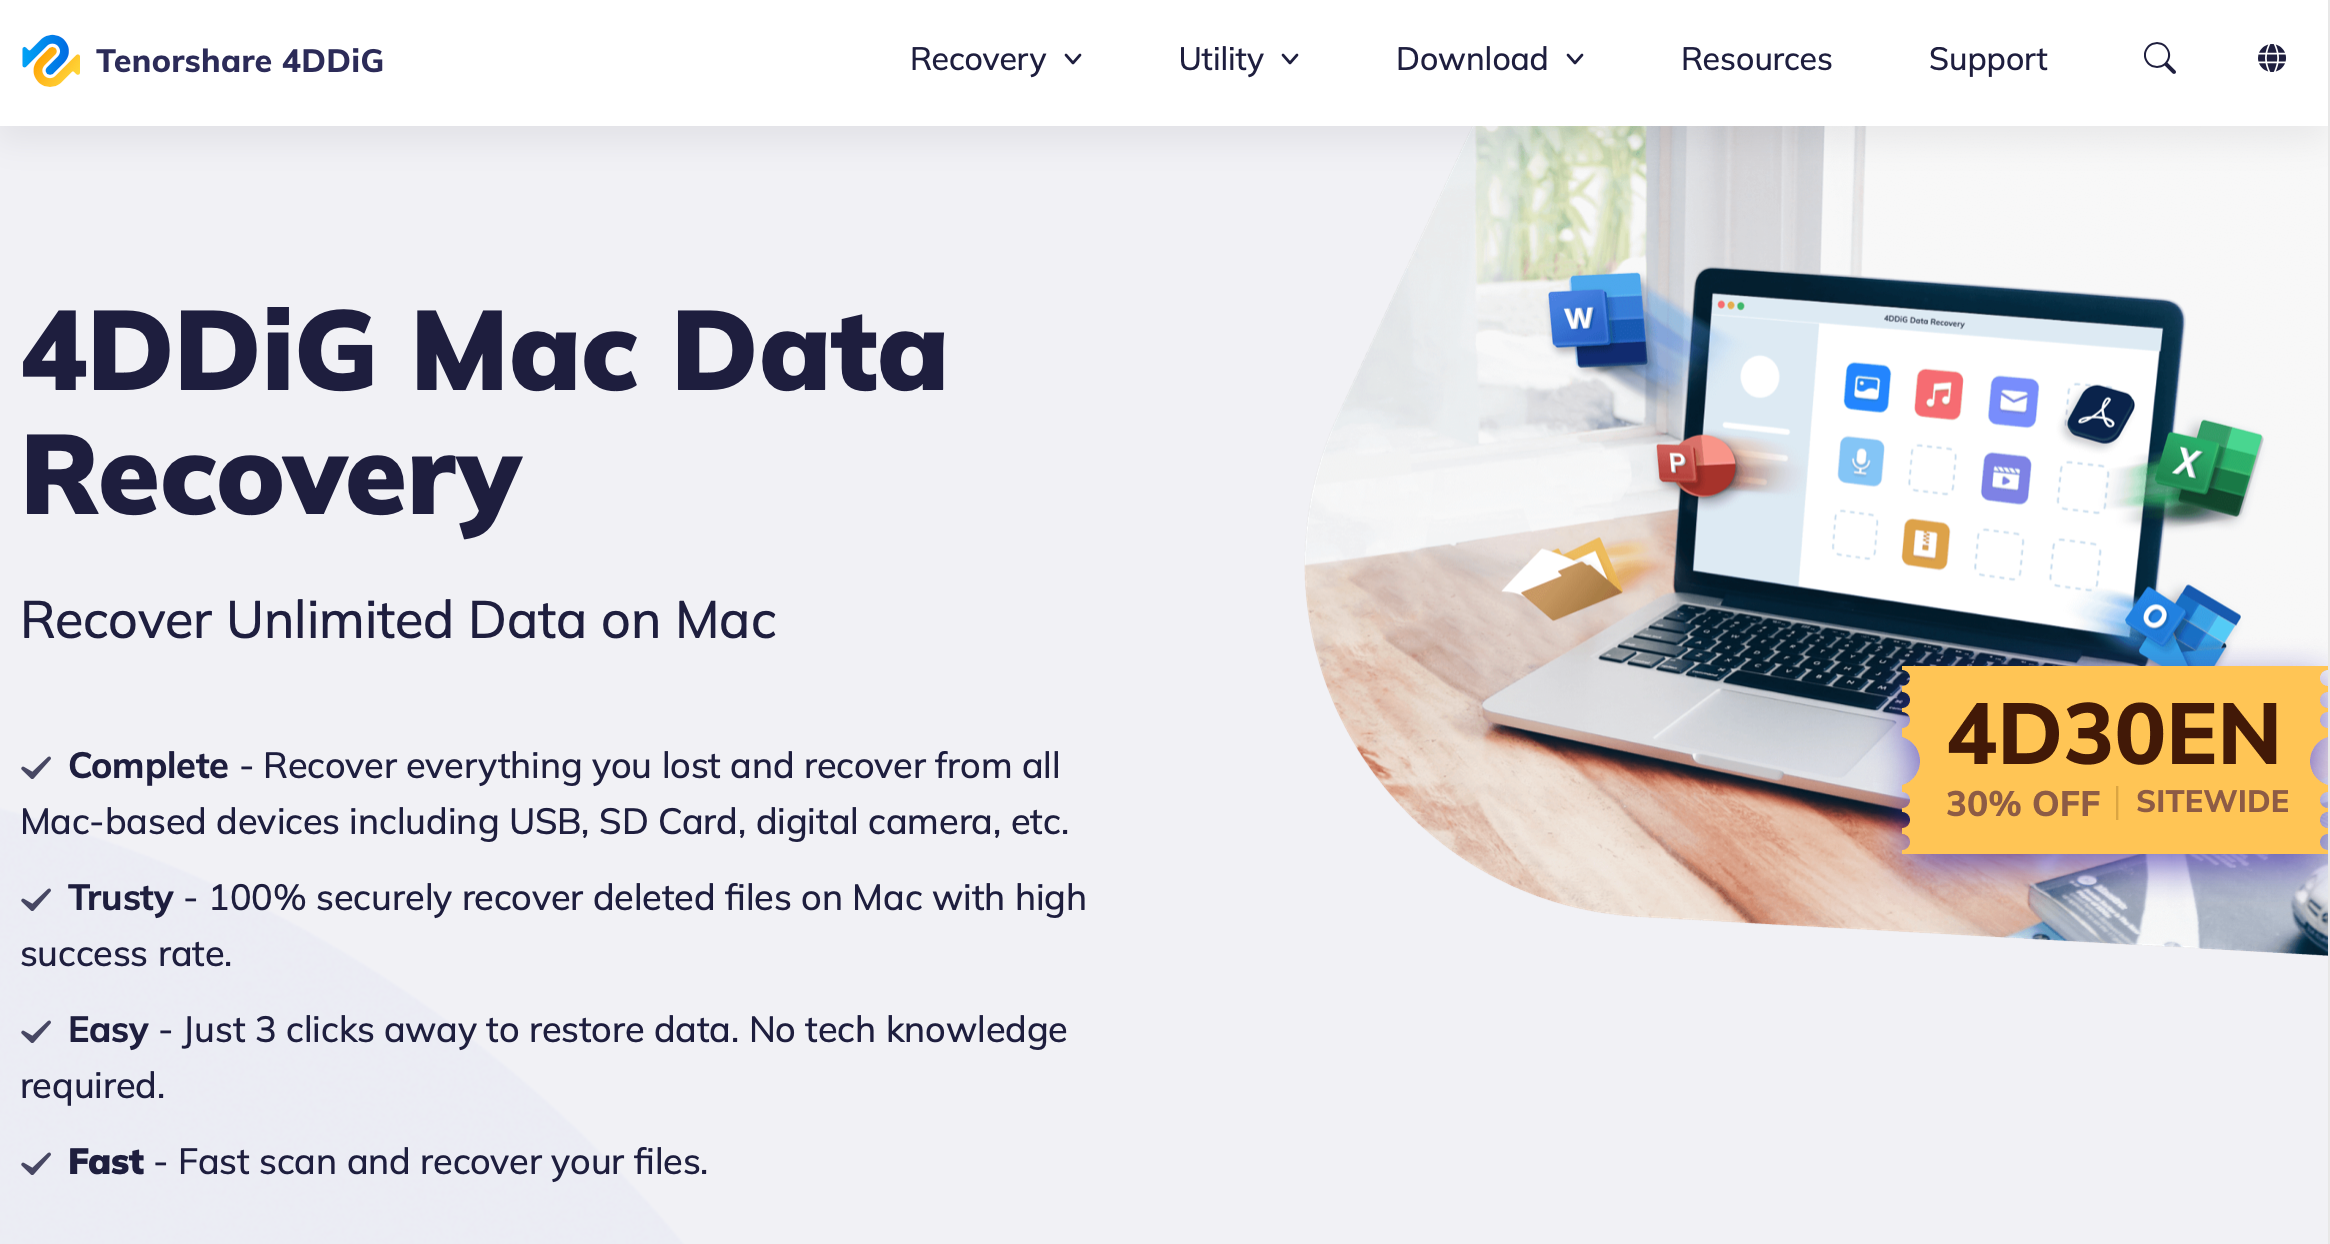 4DDiG Mac Data Recovery website page